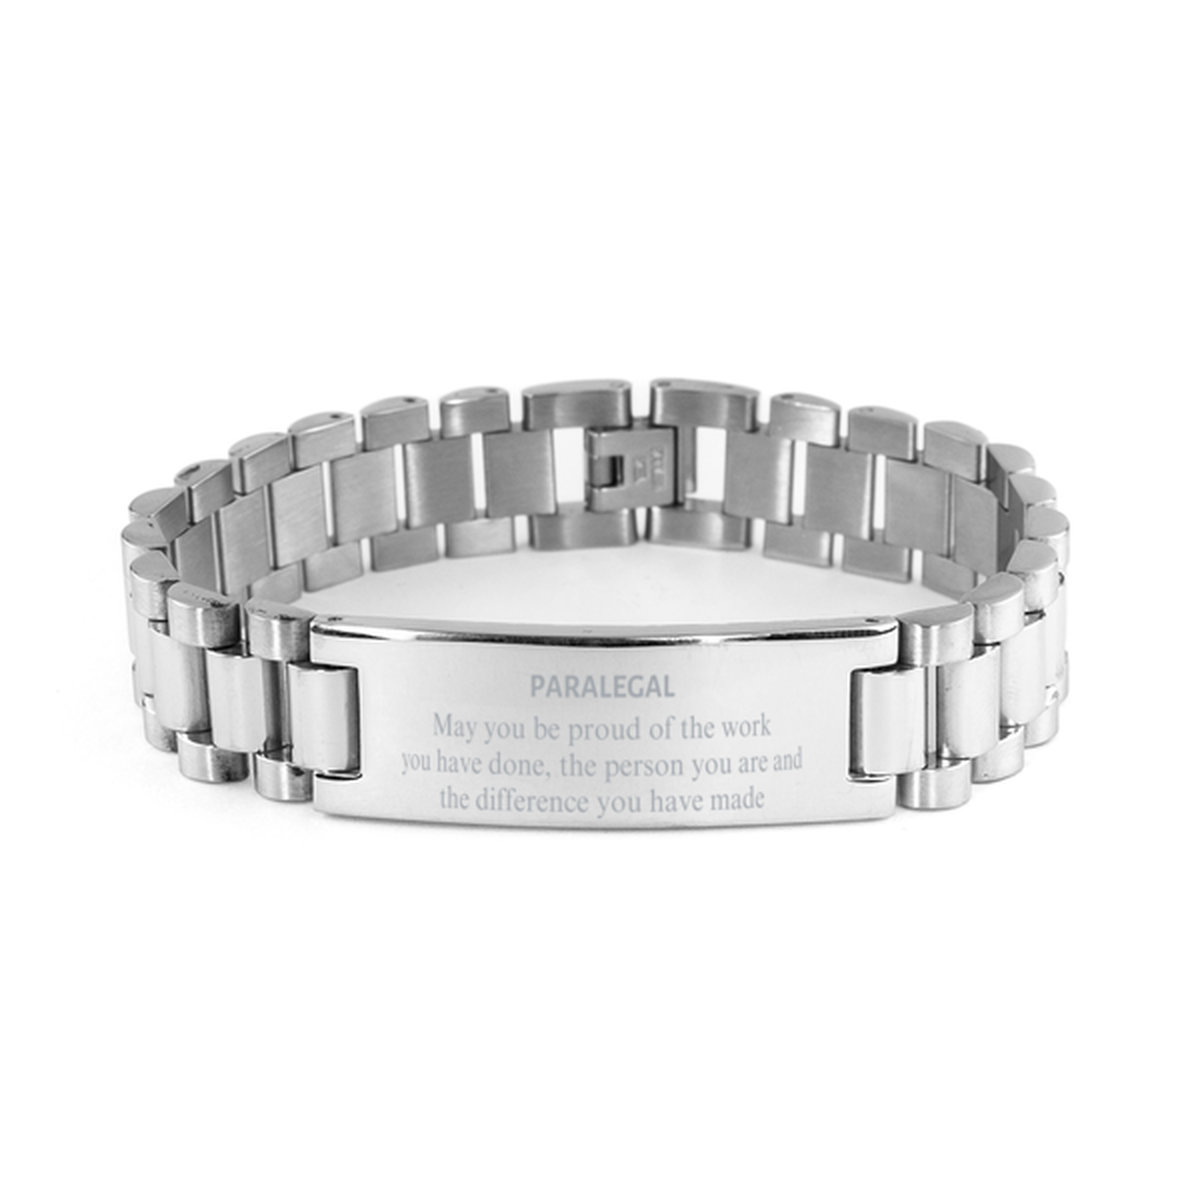 Paralegal May you be proud of the work you have done, Retirement Paralegal Ladder Stainless Steel Bracelet for Colleague Appreciation Gifts Amazing for Paralegal